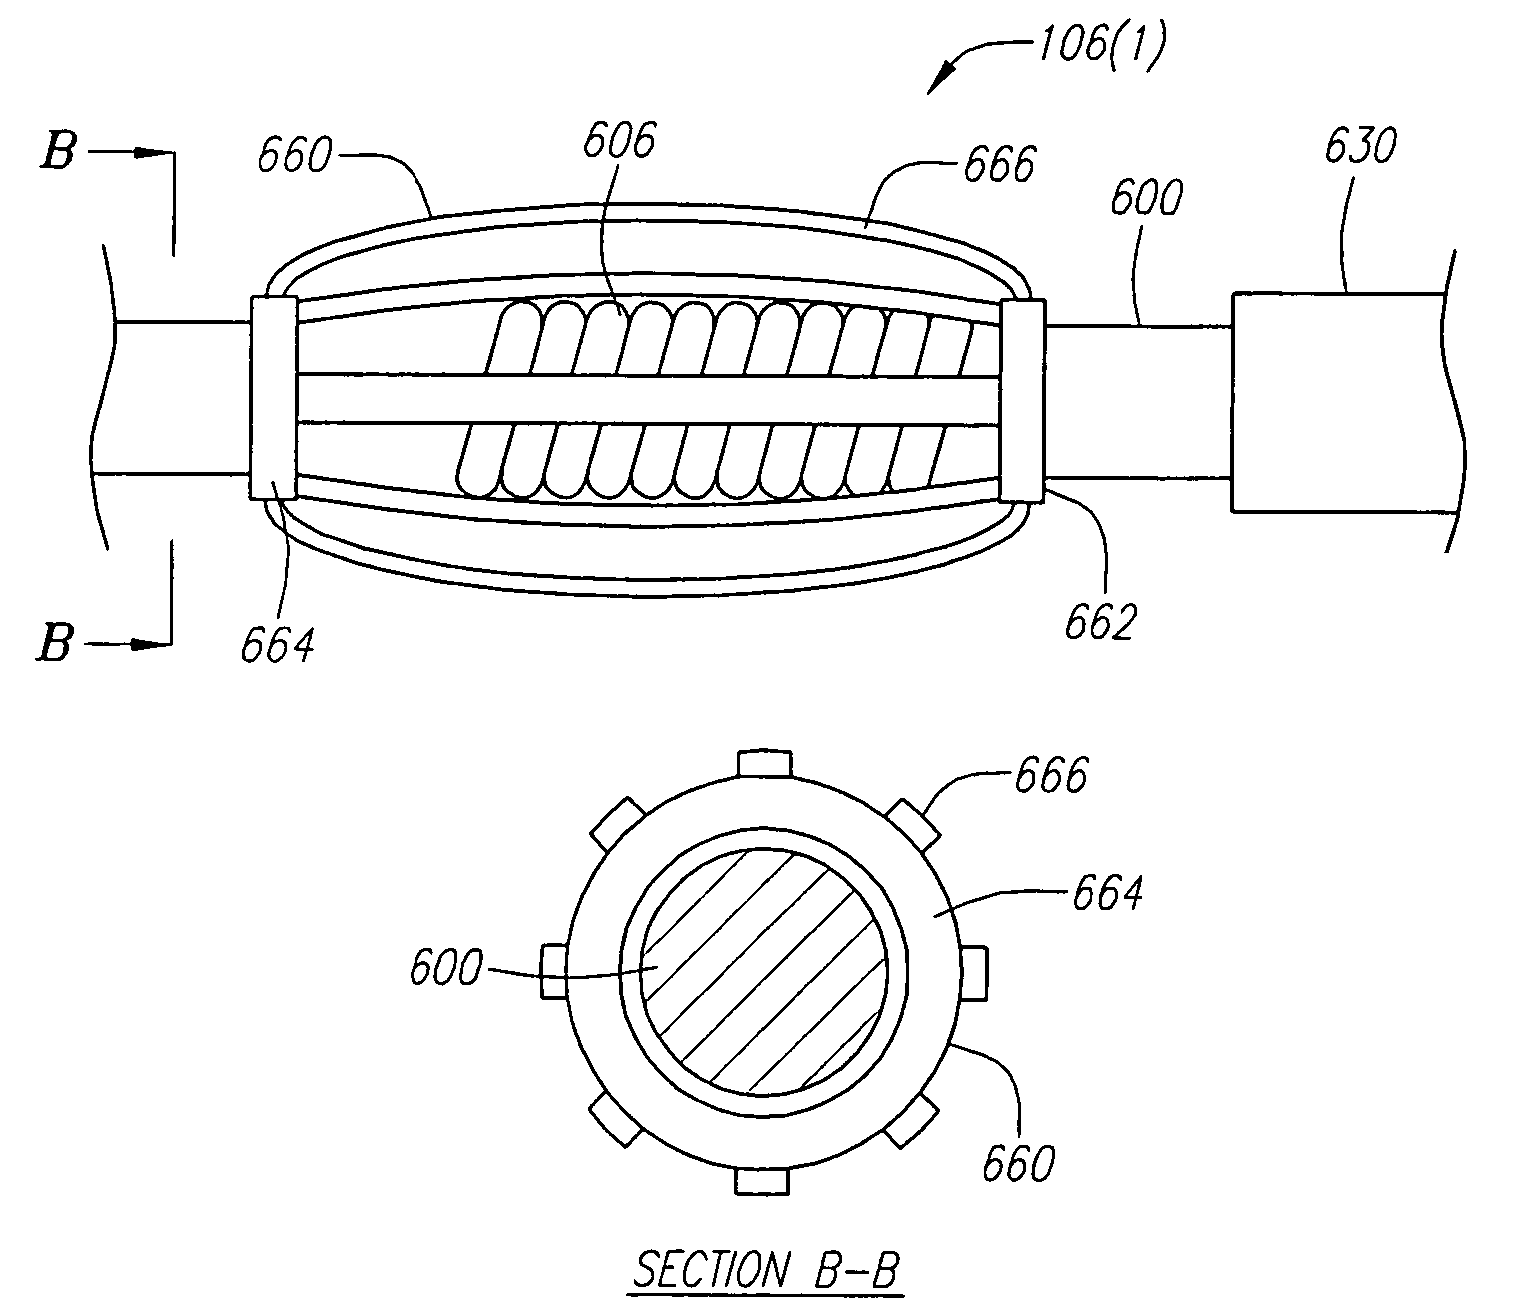 Ablation catheter with tissue protecting assembly